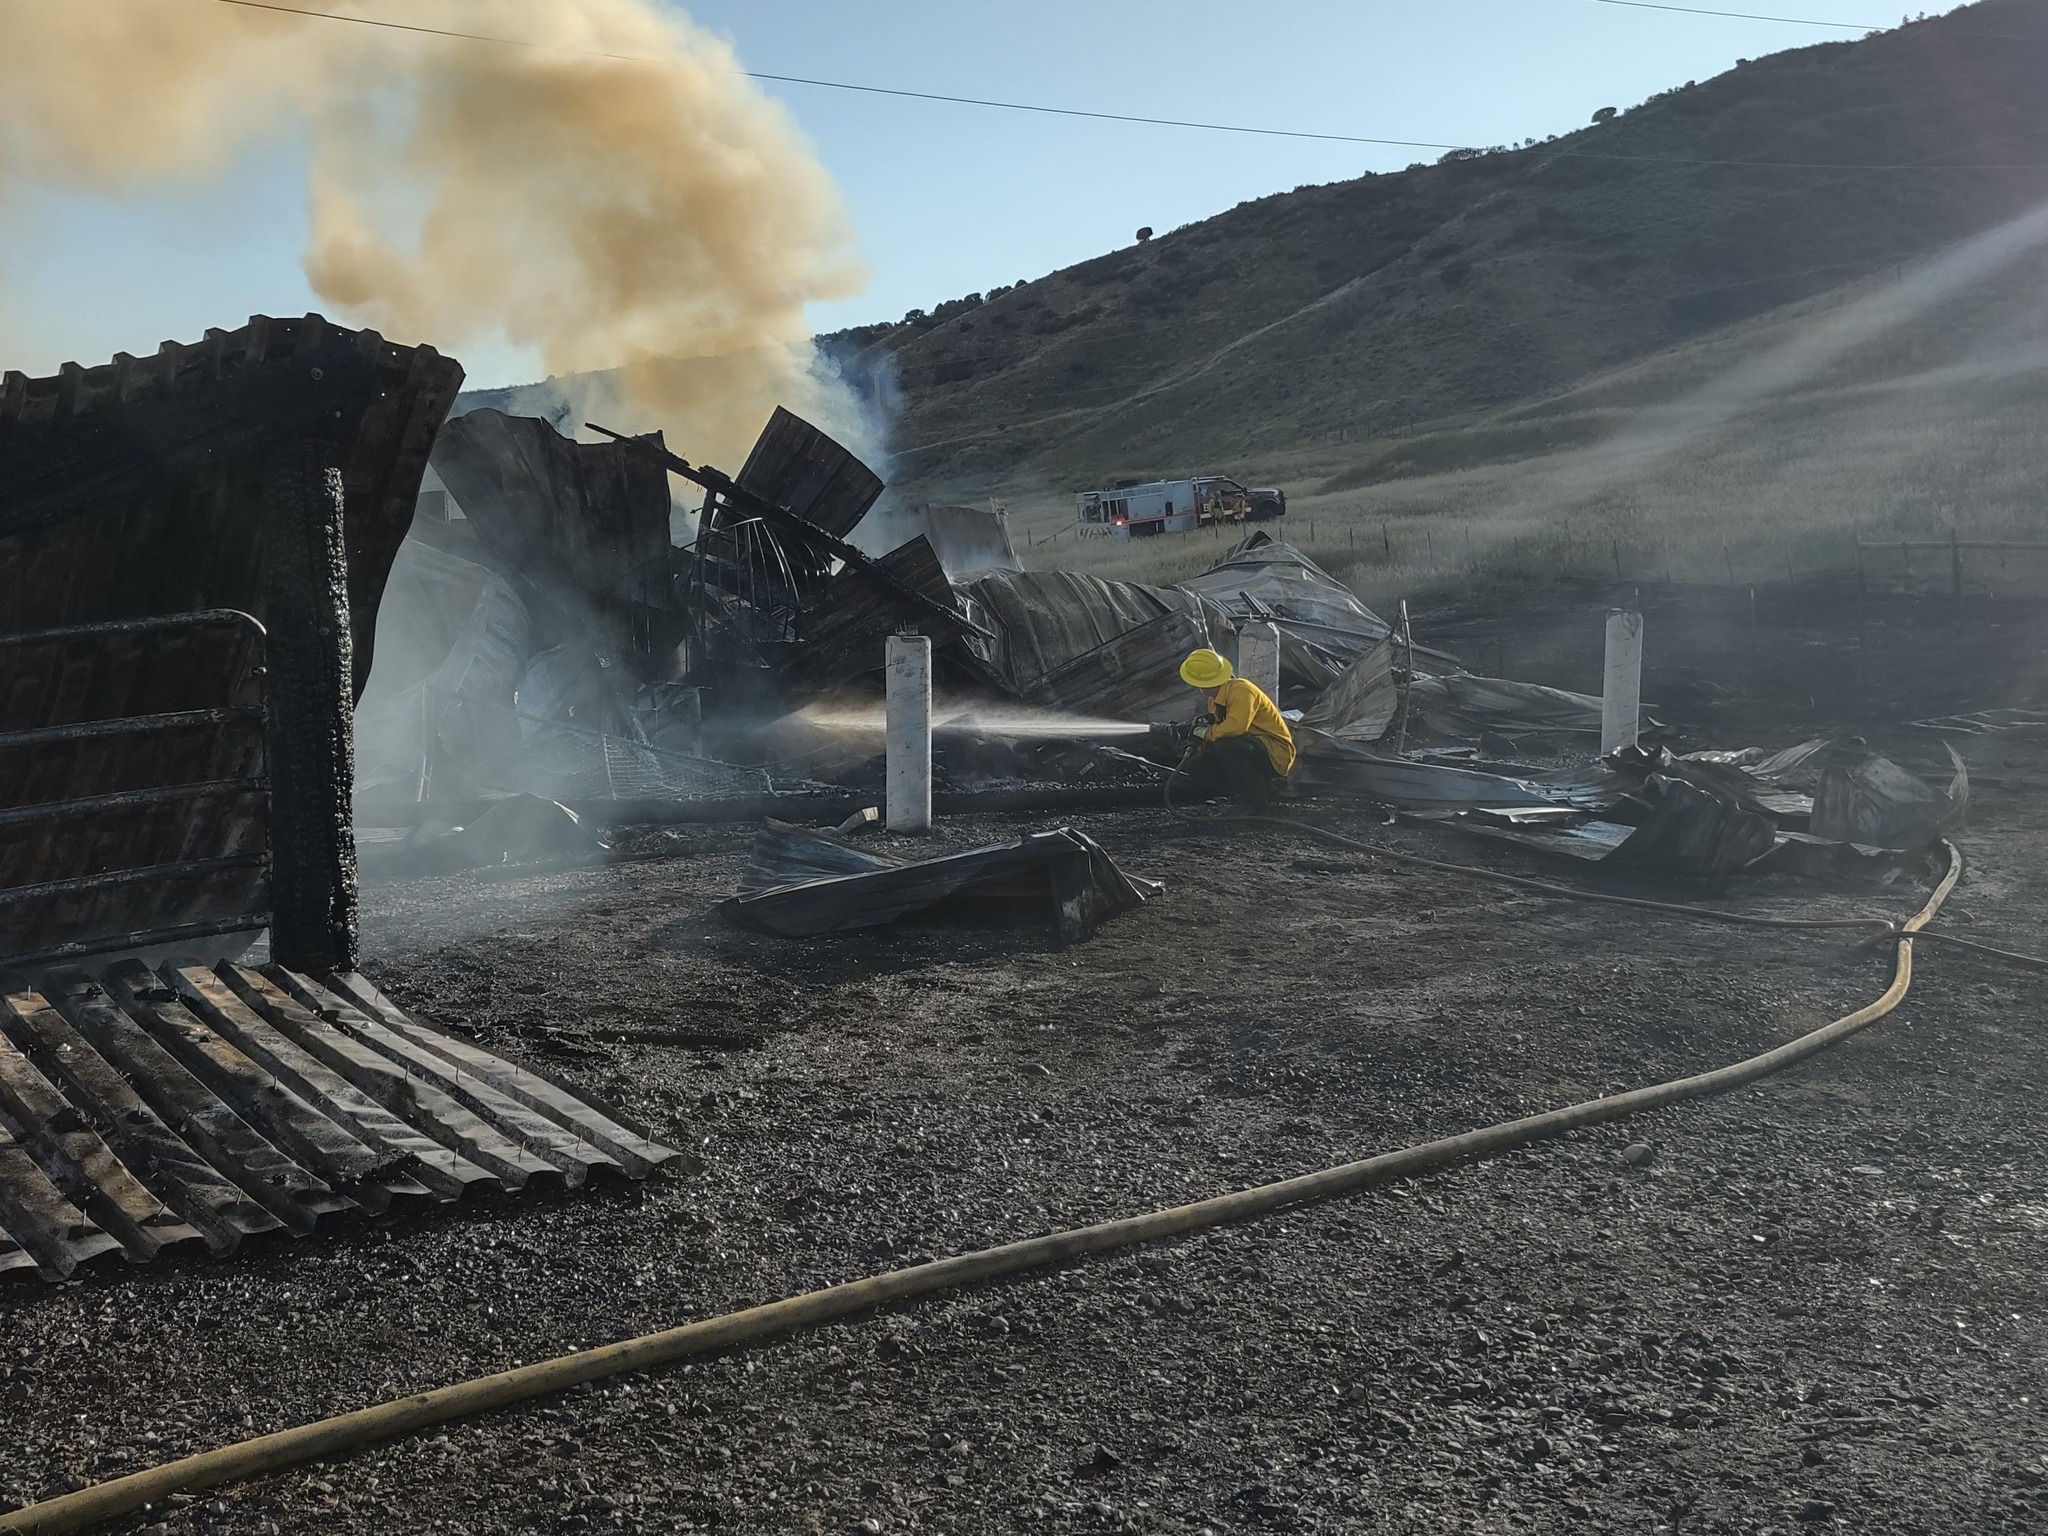 A fire in Huff Creek burns down three barns, resulting in a complete loss of each structure. Photo ...